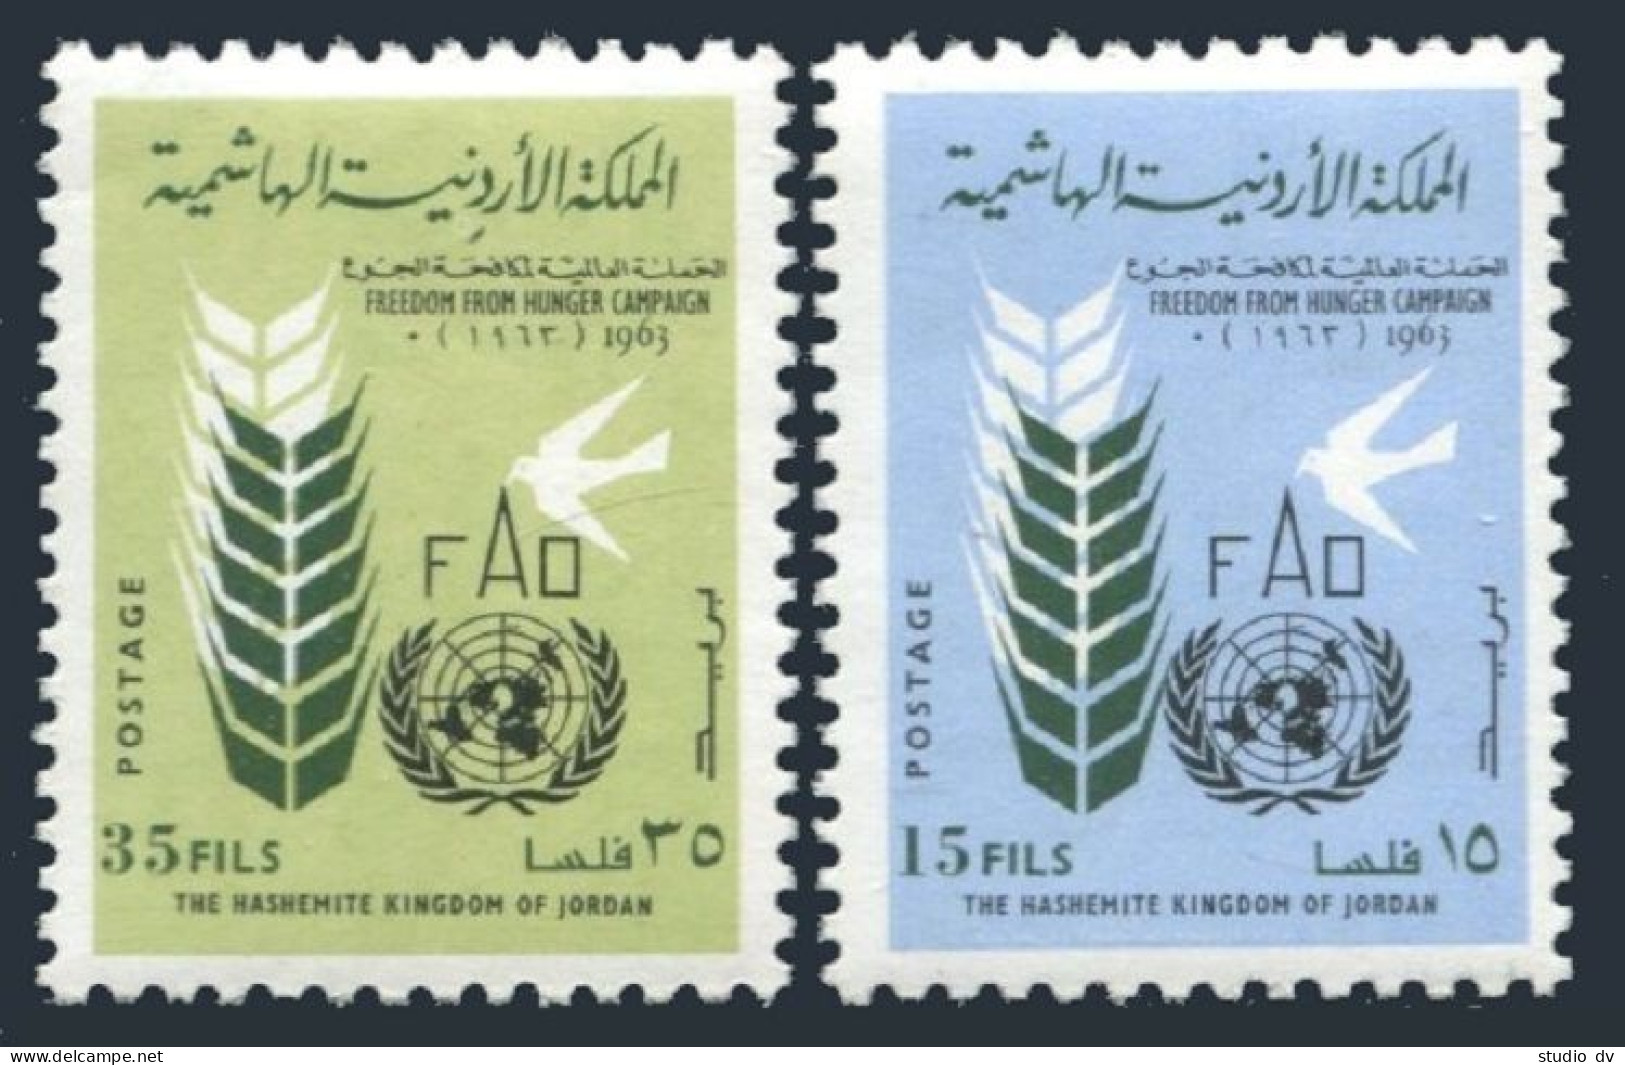 Jordan 398-399,399a & Imperf, MNH. FAO Freedom From Hunger Campaign 1963. - Jordanien